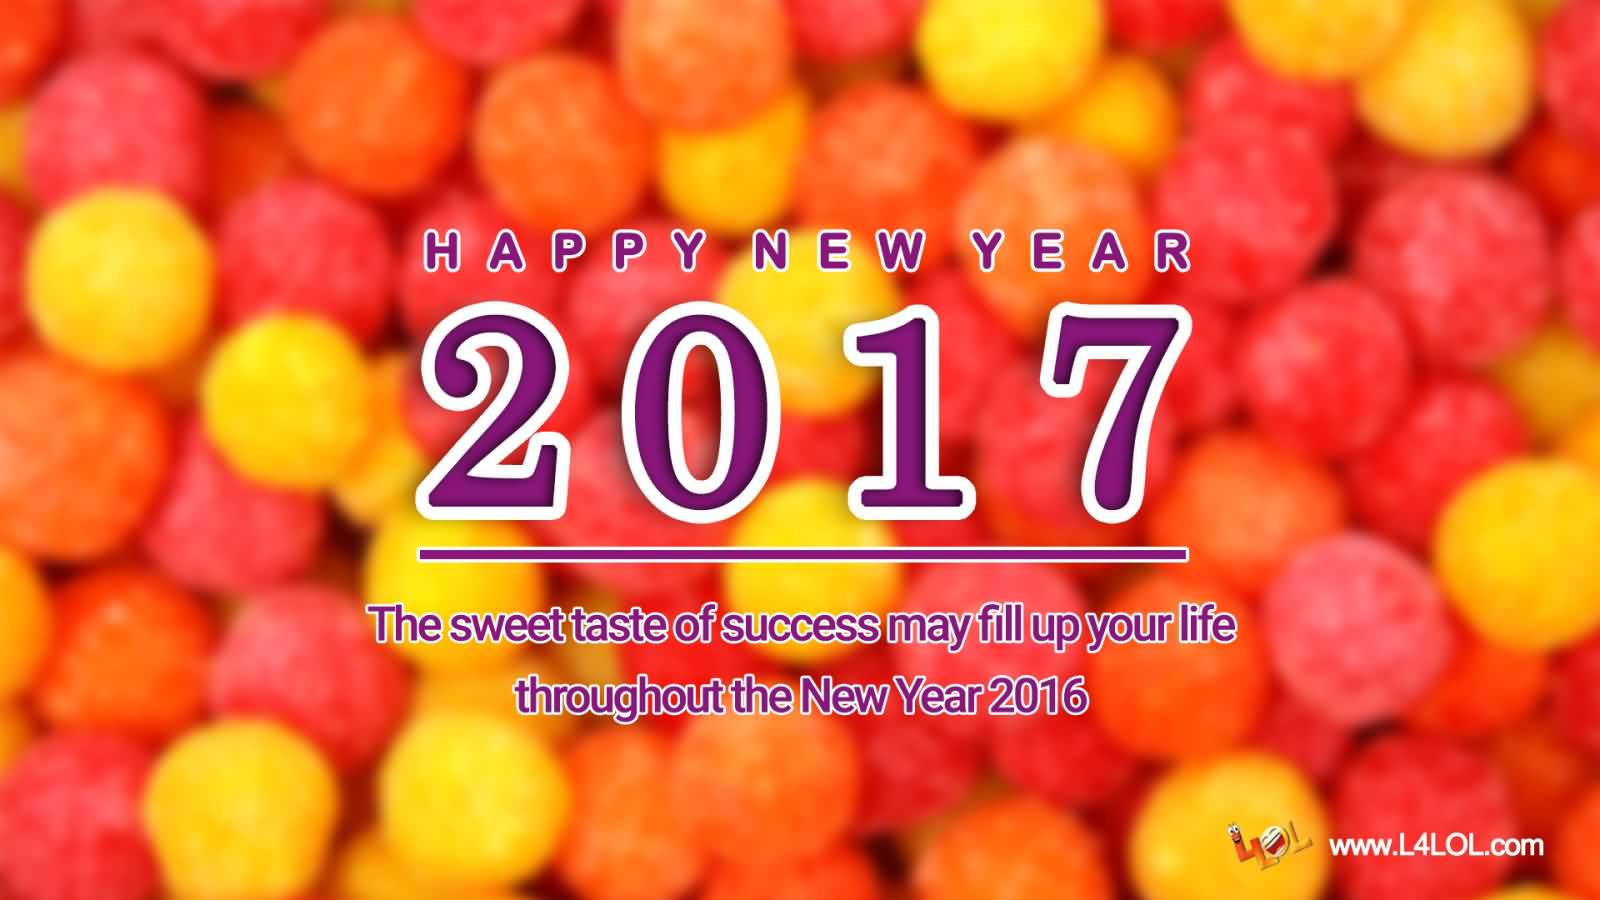 Happy New Year 2017 The Sweet Taste Of Success May Fill Up Your Life Throughout The New Year 2016